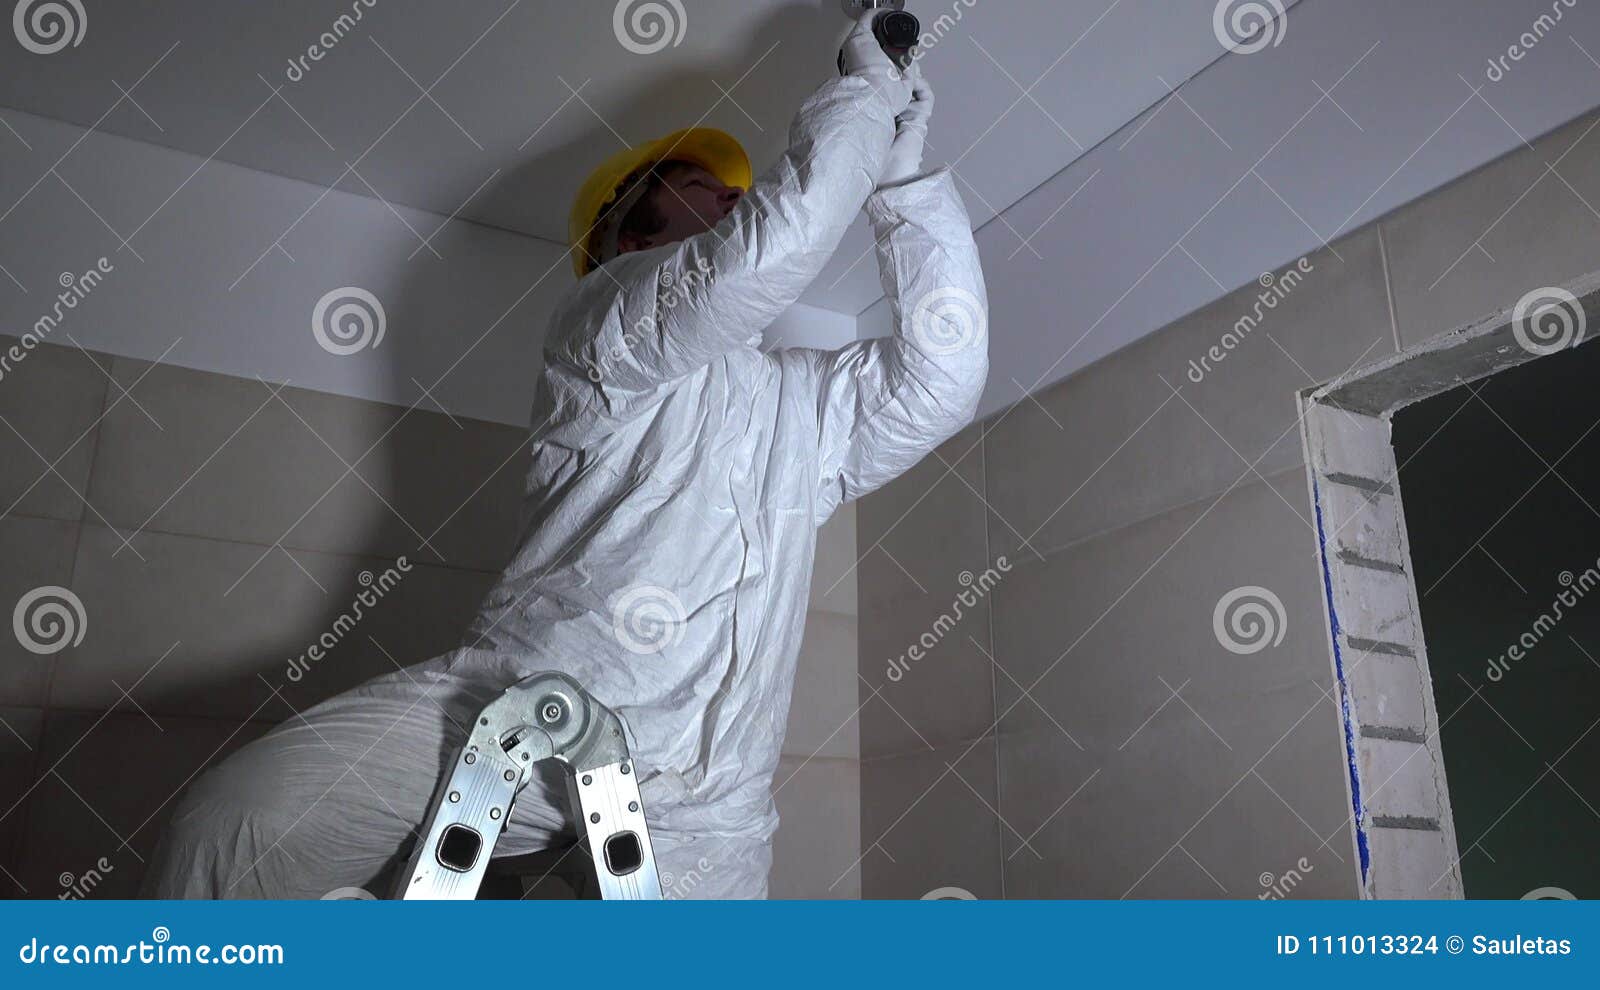 Manual Worker Drilling Hole In Ceiling Plasterboard For Led